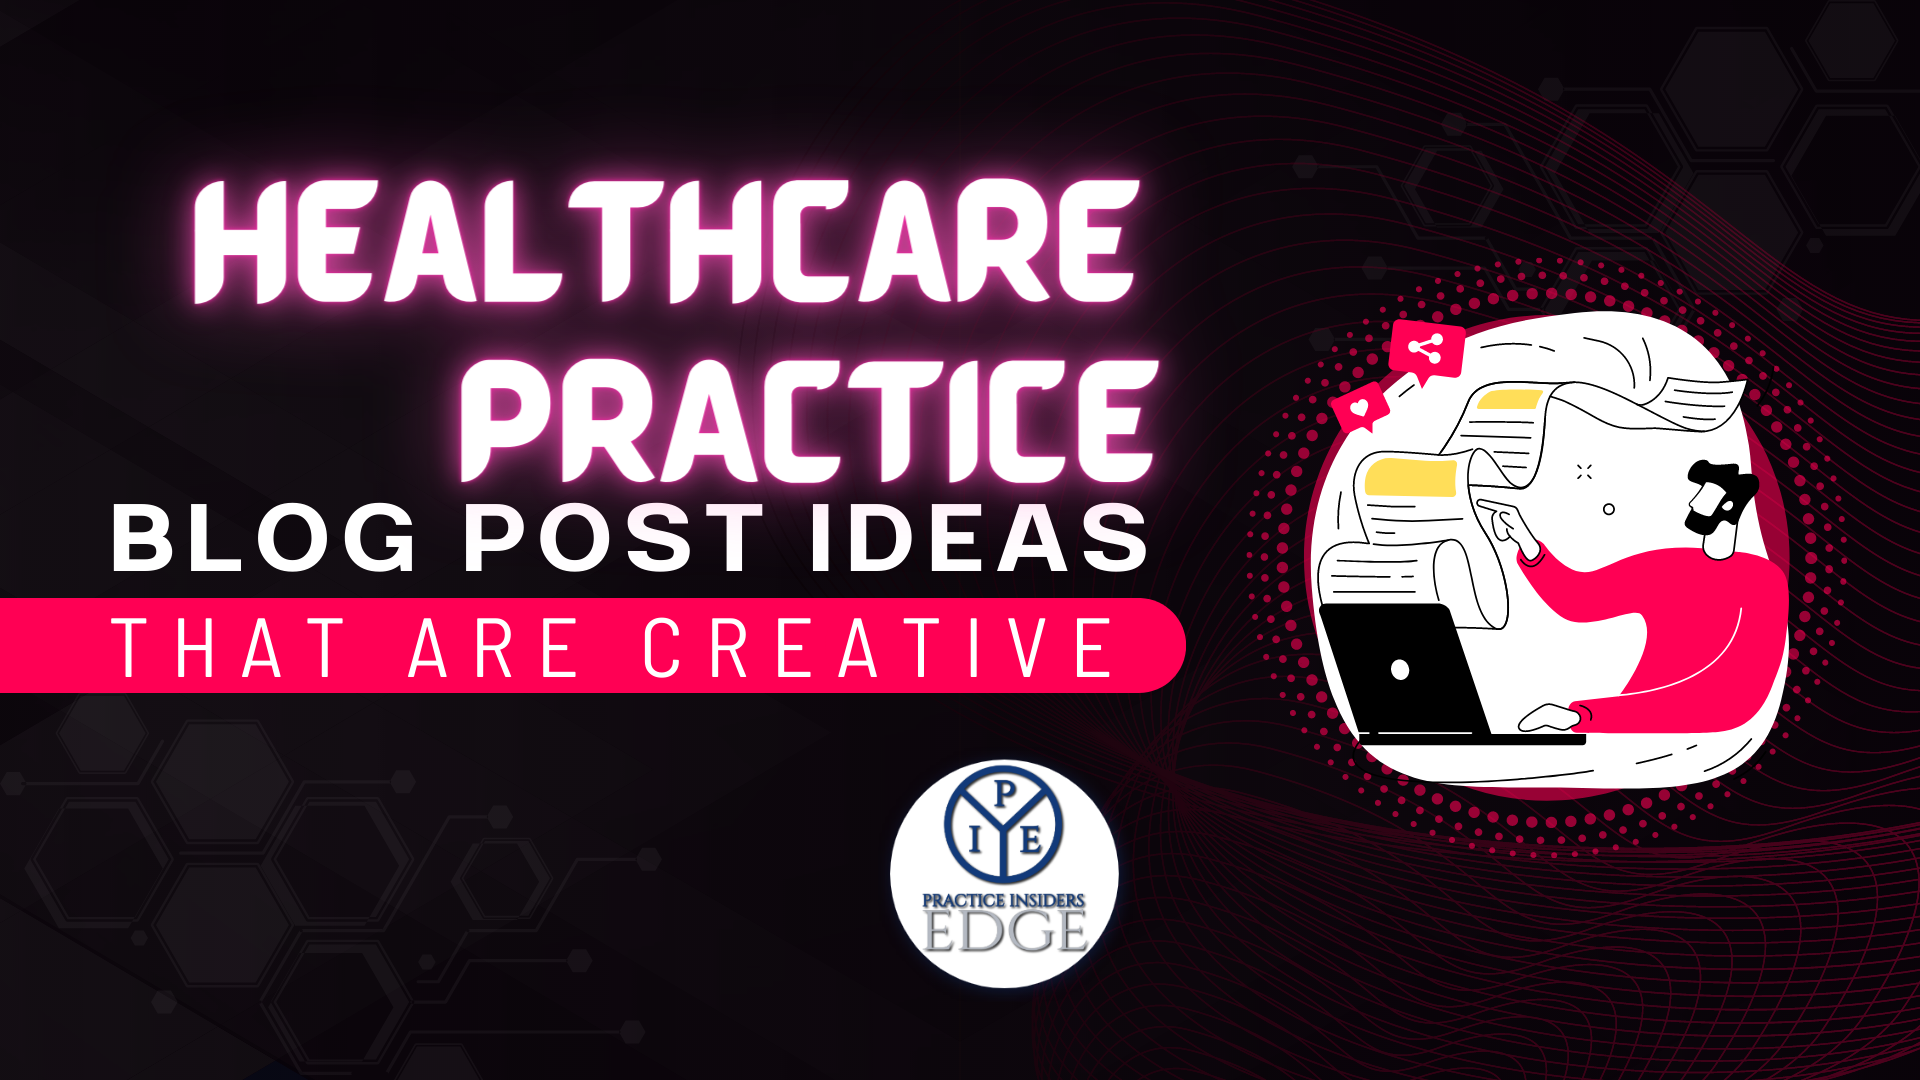 Creative Blog Post Ideas for Healthcare Practices